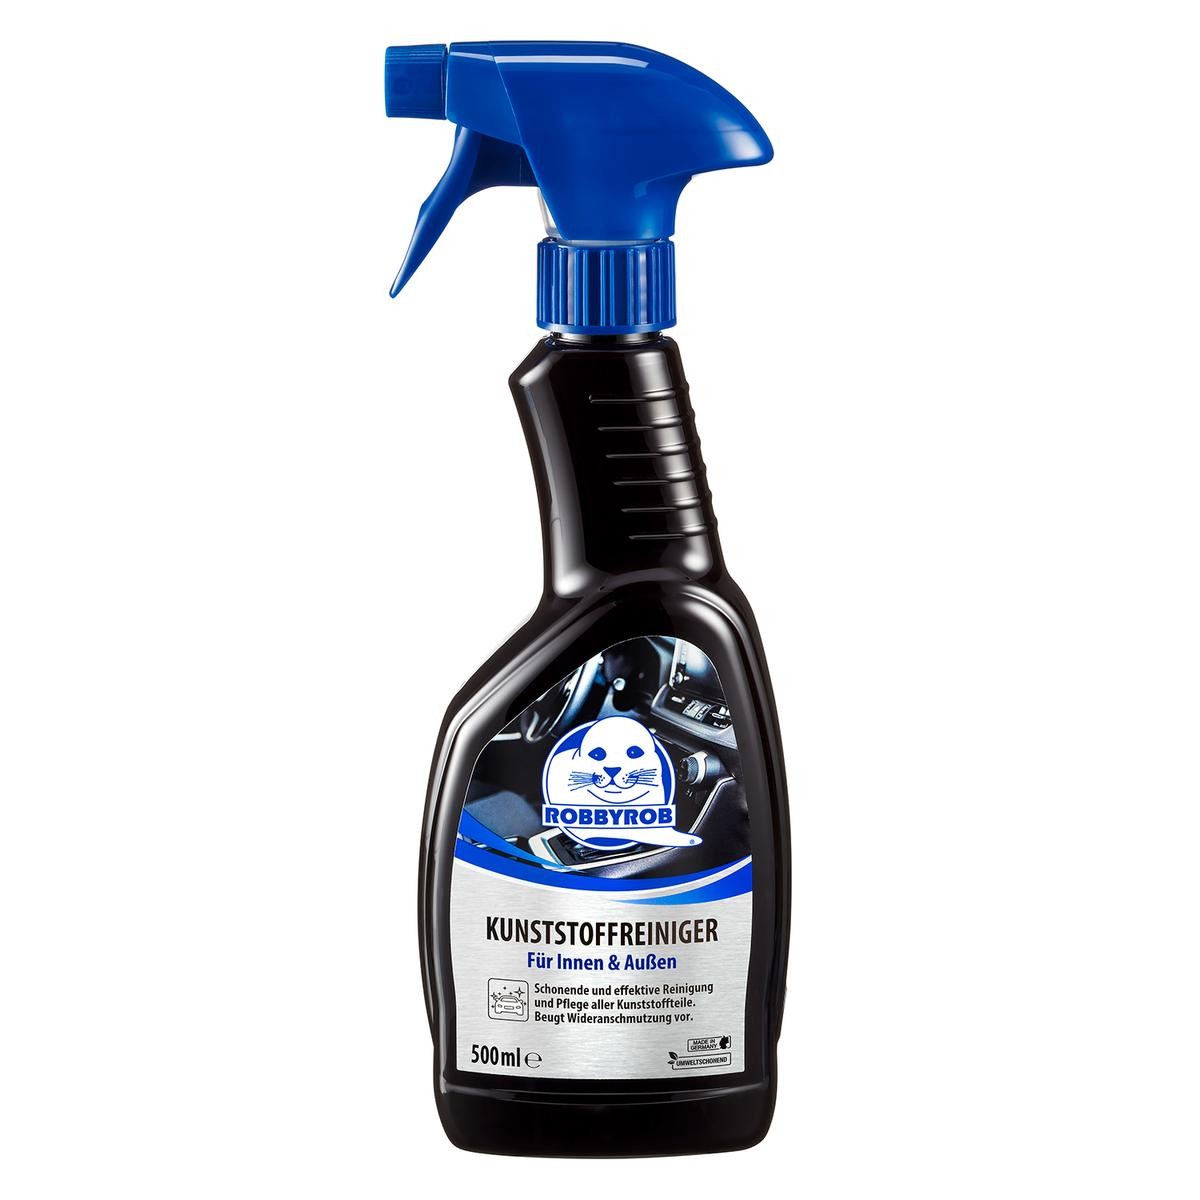 ROBBYROB Kunststoffreiniger 4805000000 Synthetic Material Care Products Capacity: 500ml, aerosol